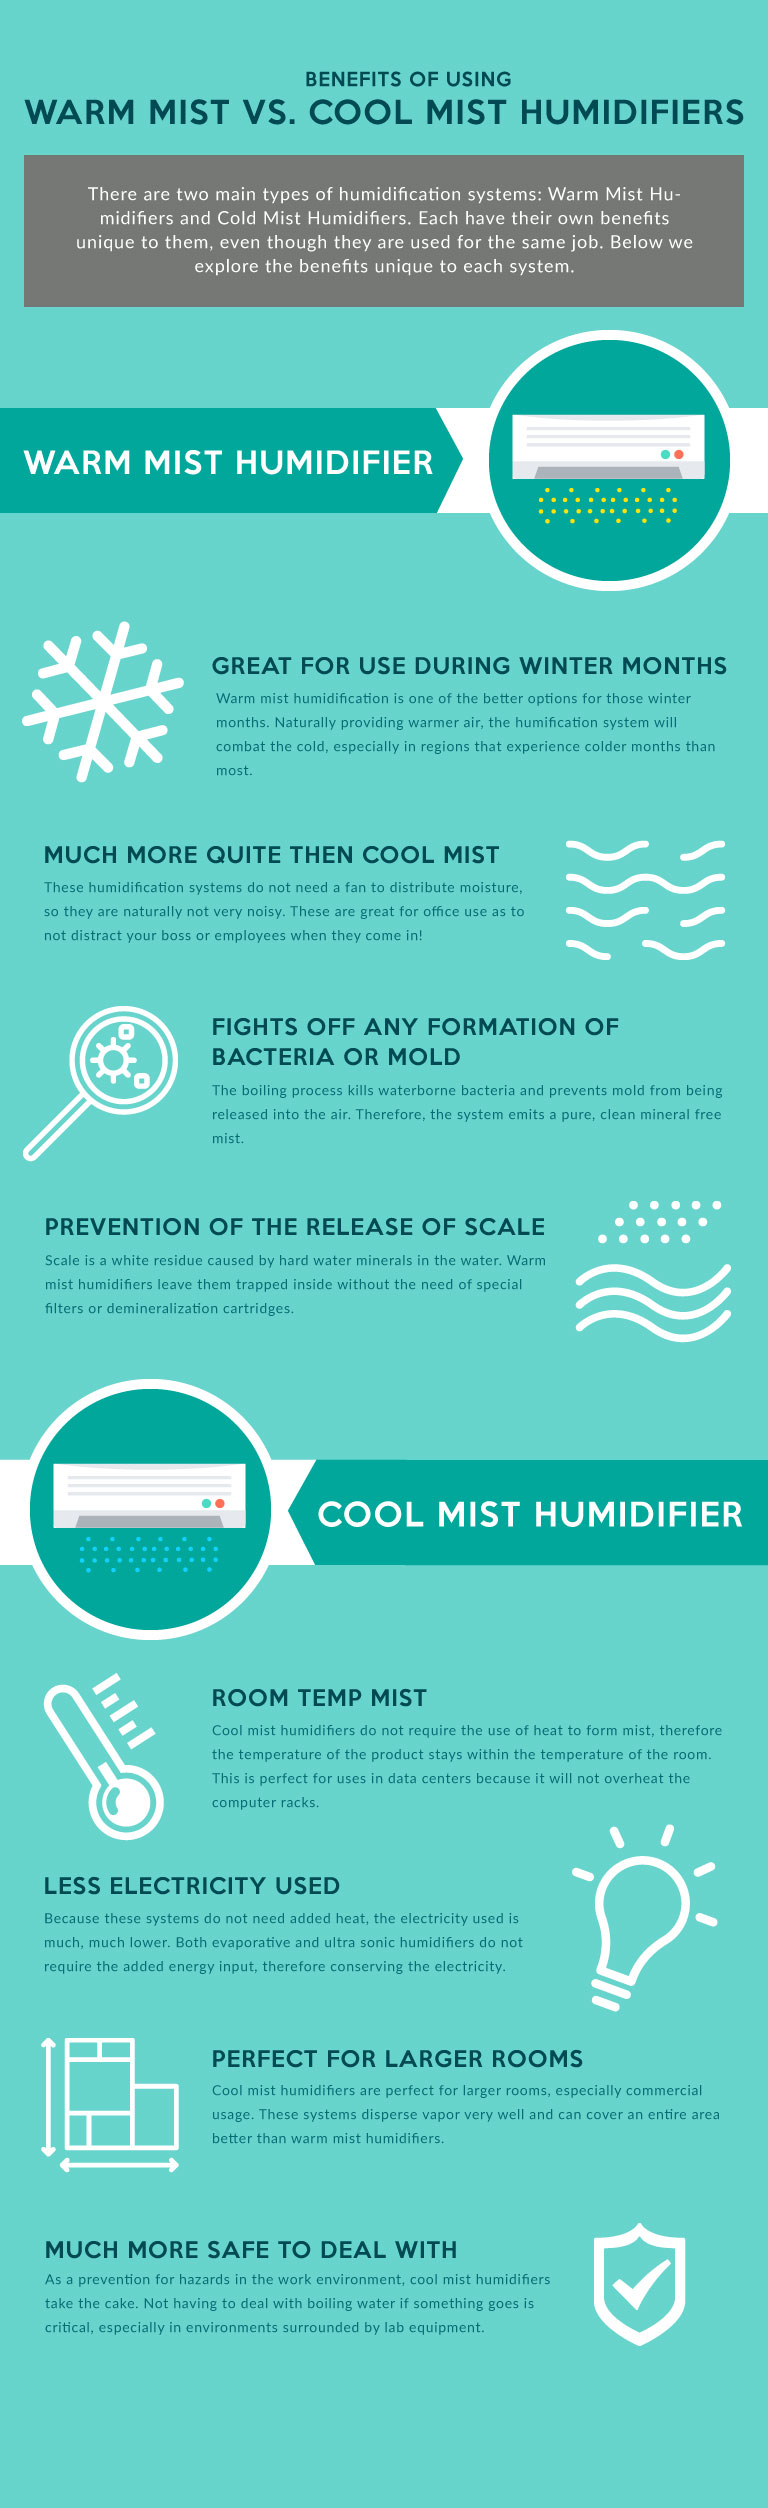 ultrasonic humidification infographic warm and cool mist